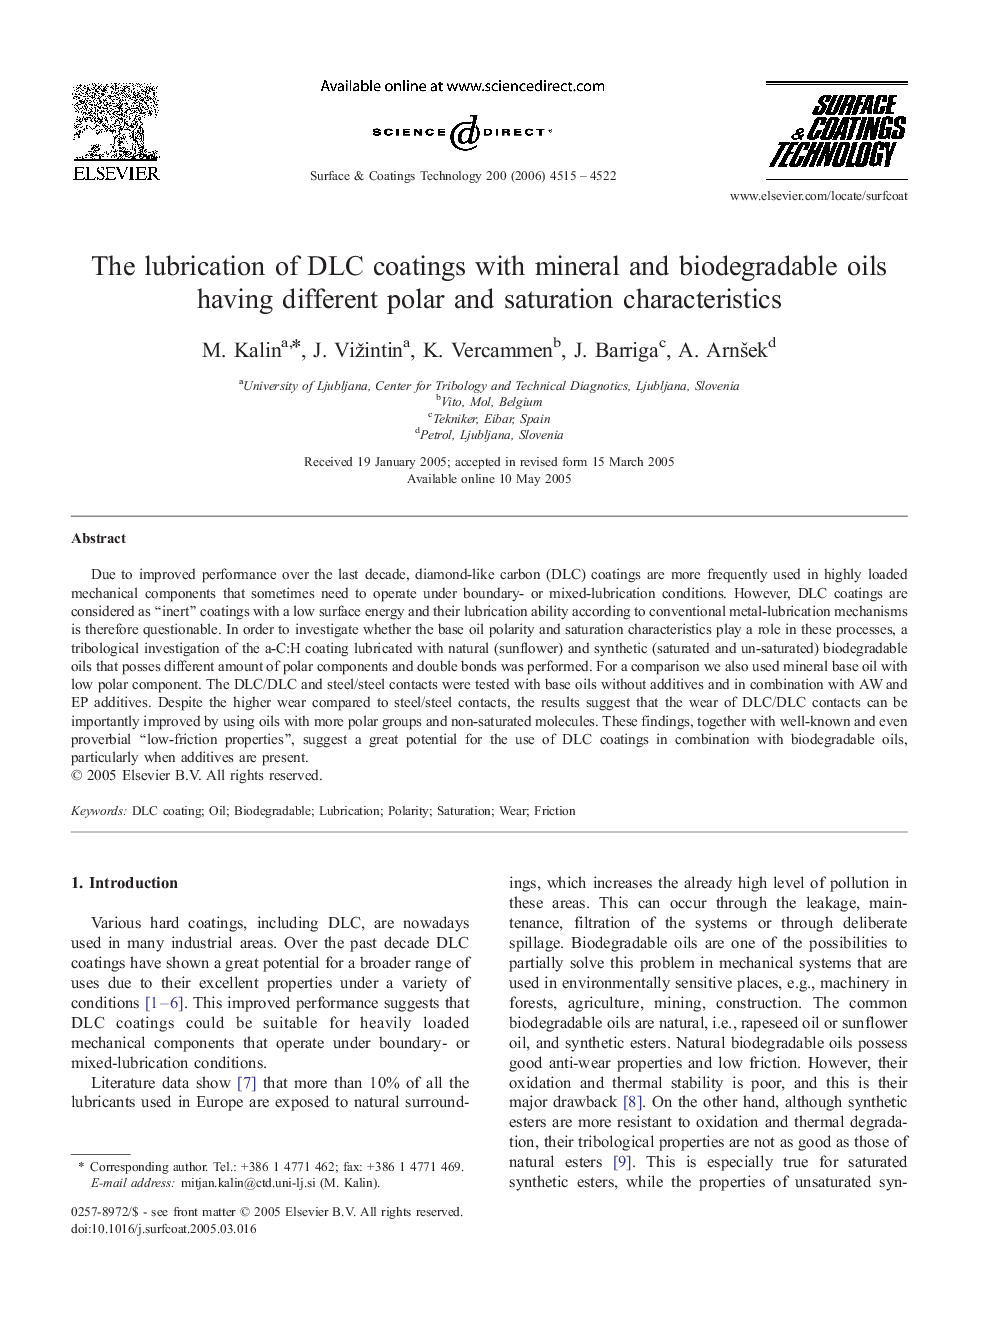 The lubrication of DLC coatings with mineral and biodegradable oils having different polar and saturation characteristics